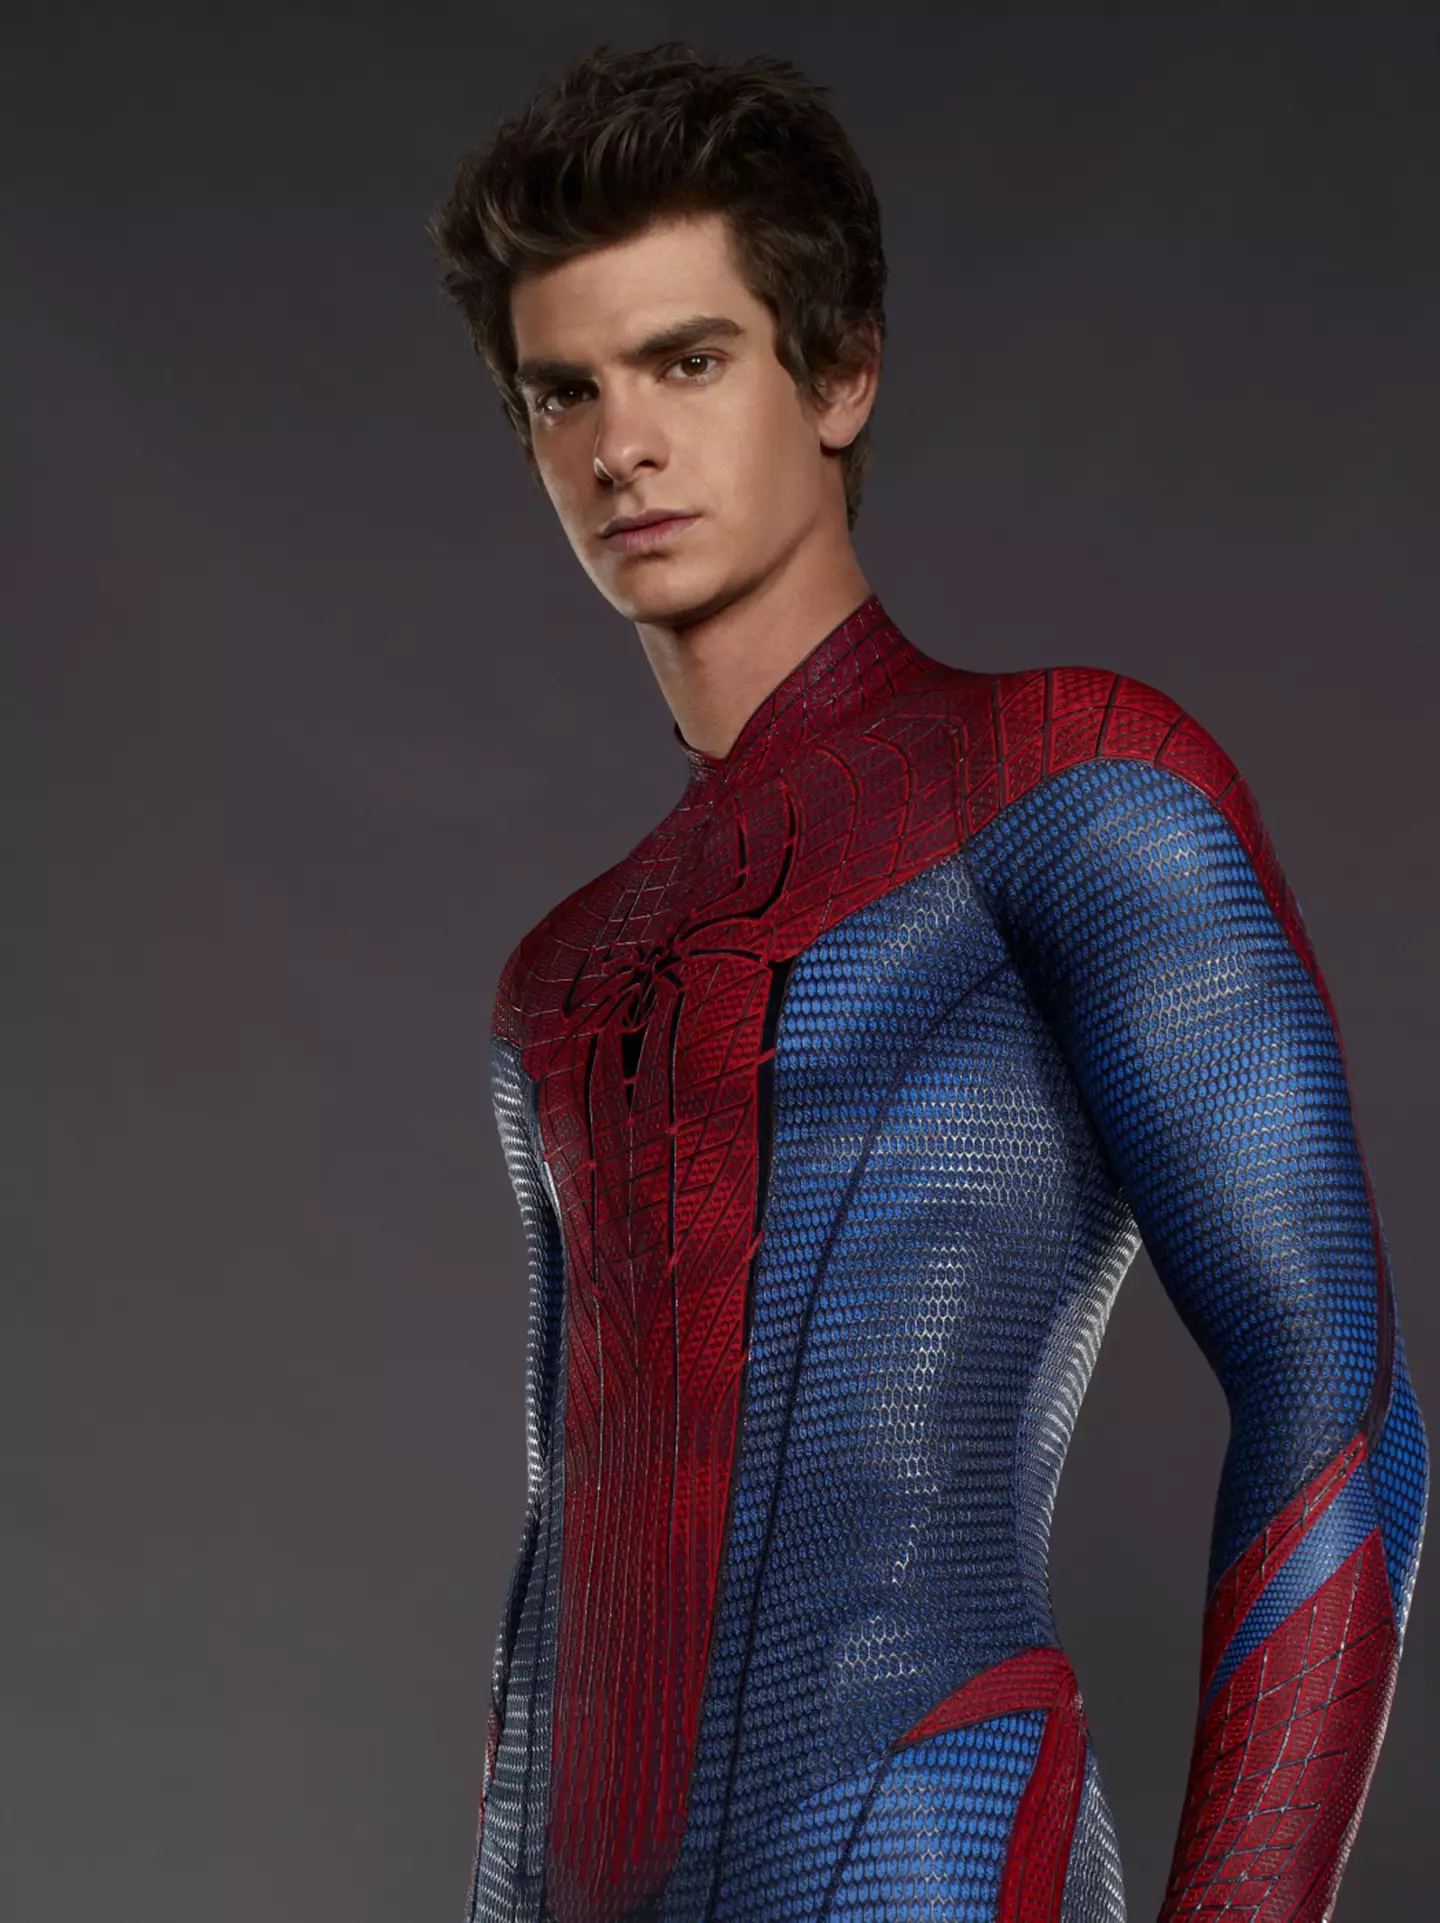 Andrew Garfield recently reprised his role as Spider-Man.